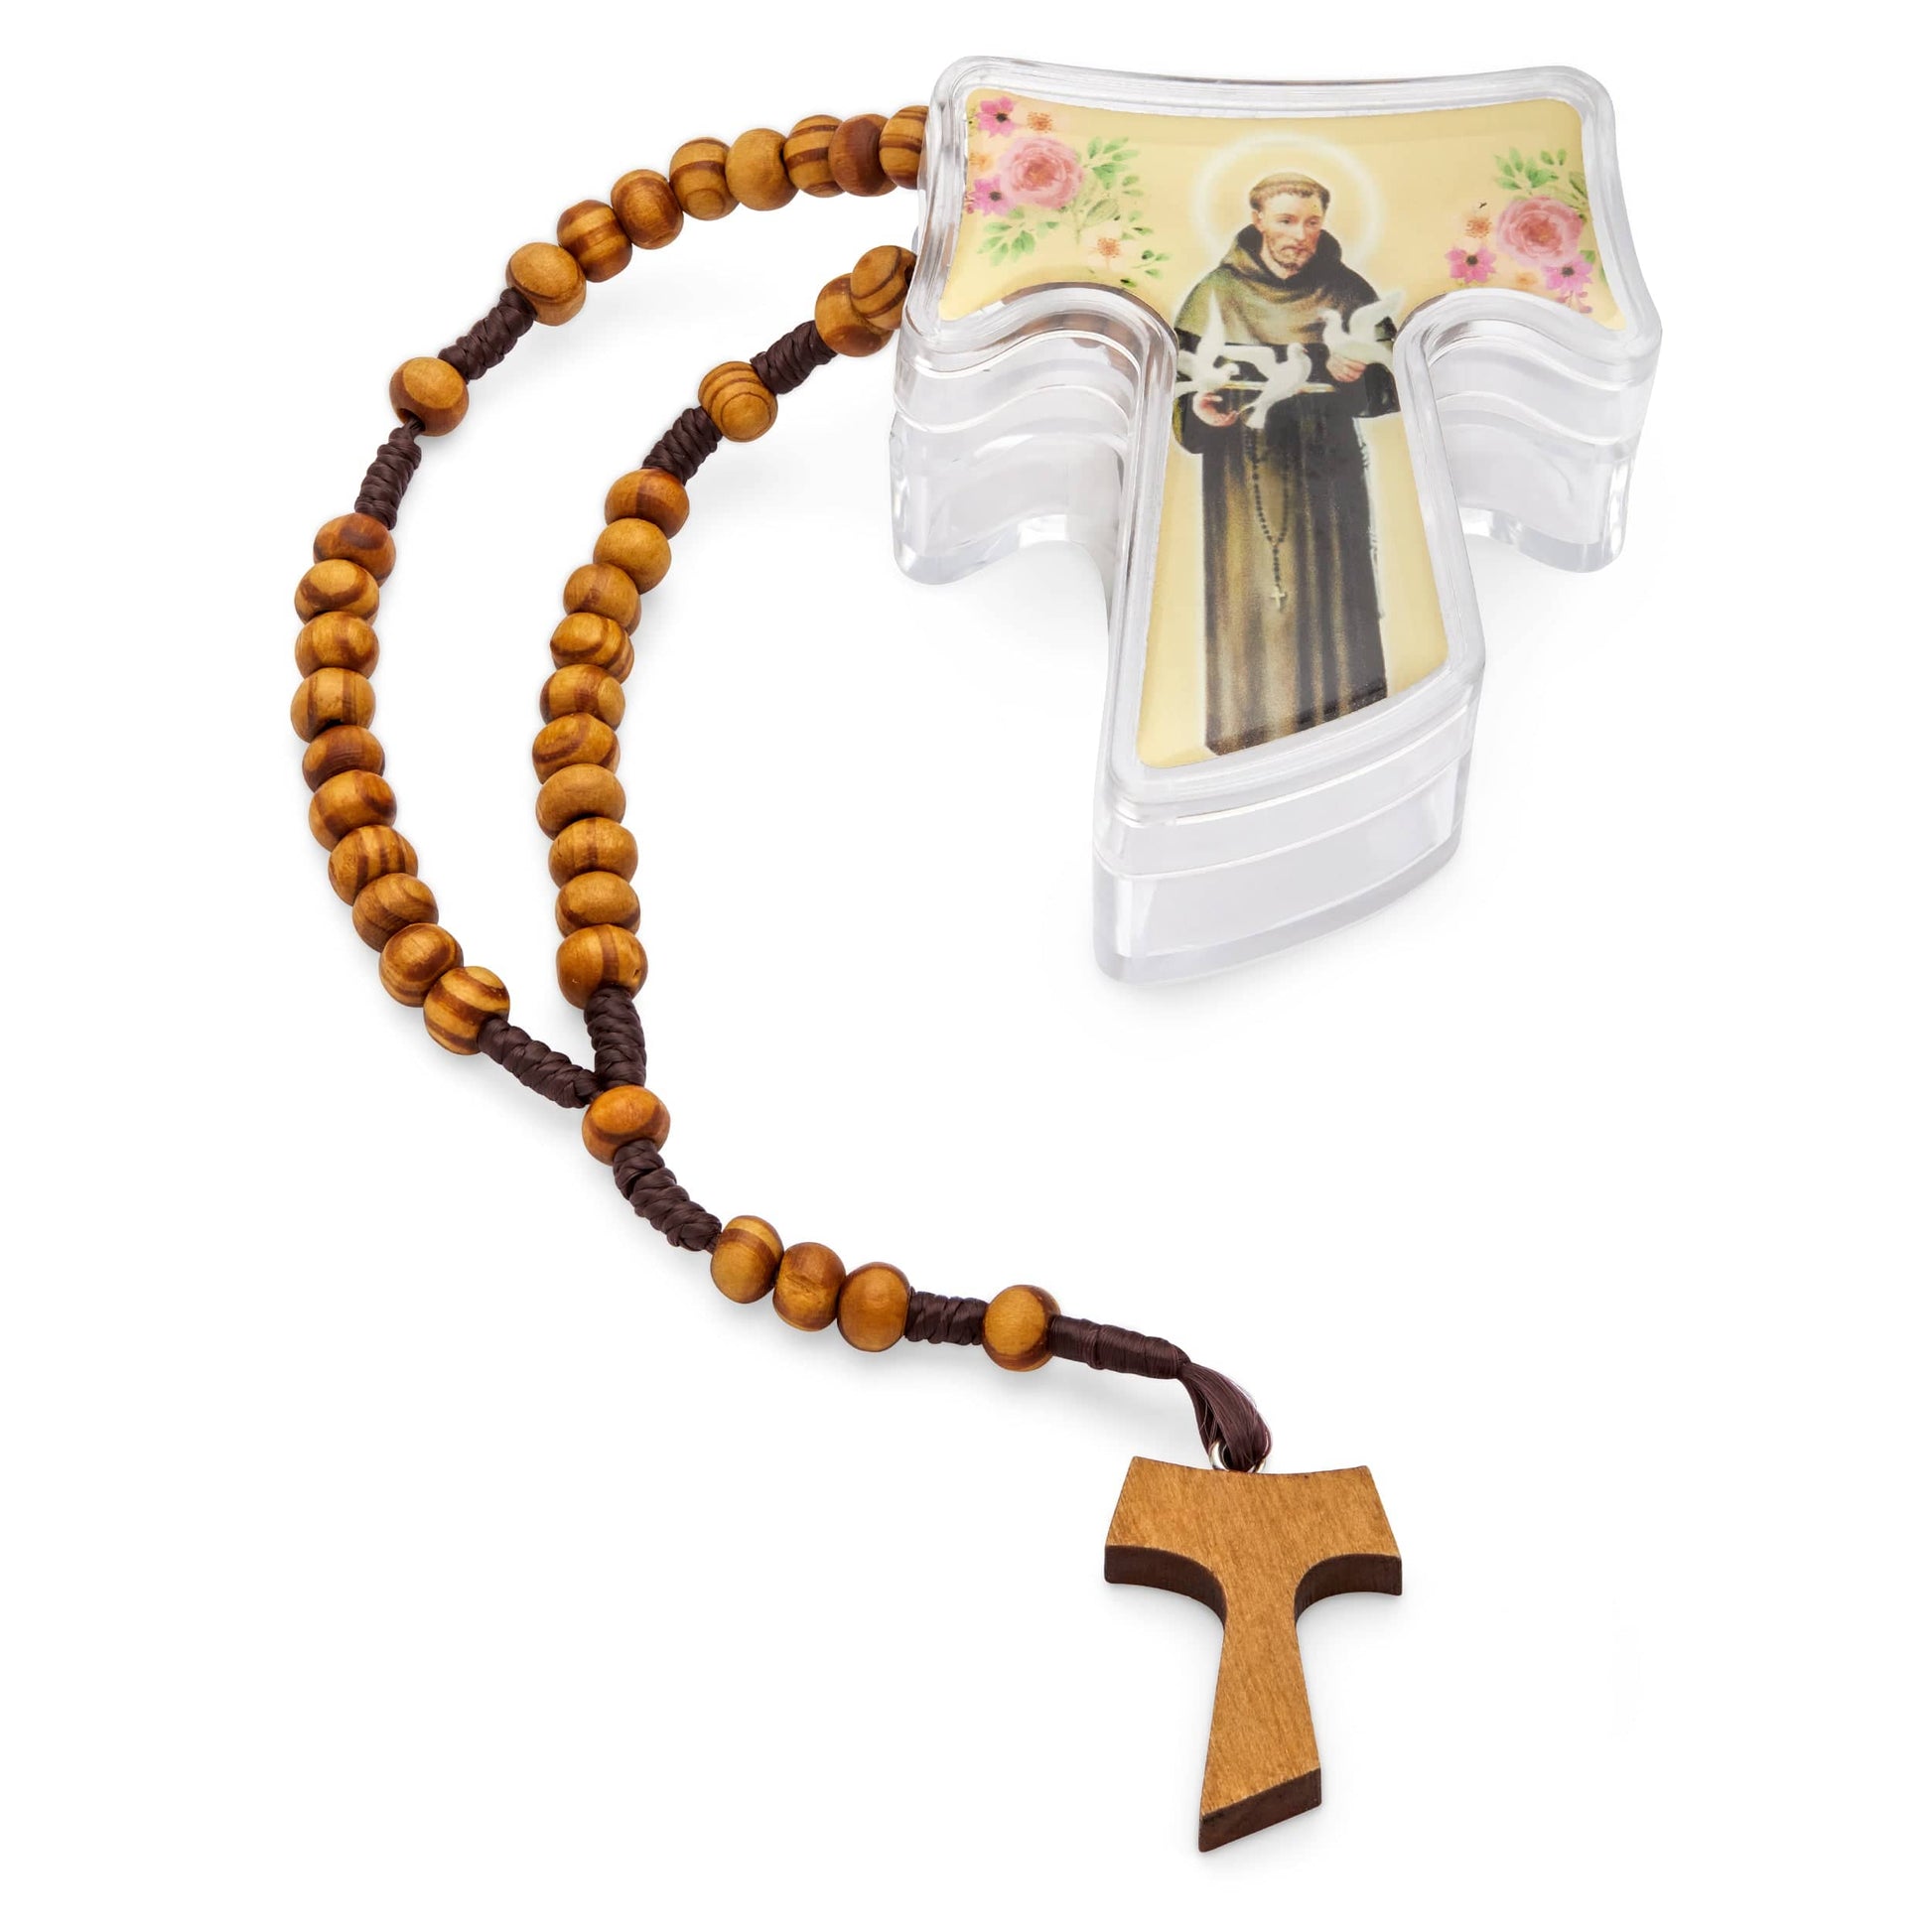 MONDO CATTOLICO Prayer Beads 36 cm (14.17 in) / 8 mm (0.31 in) Wooden Tao Rosary and Case